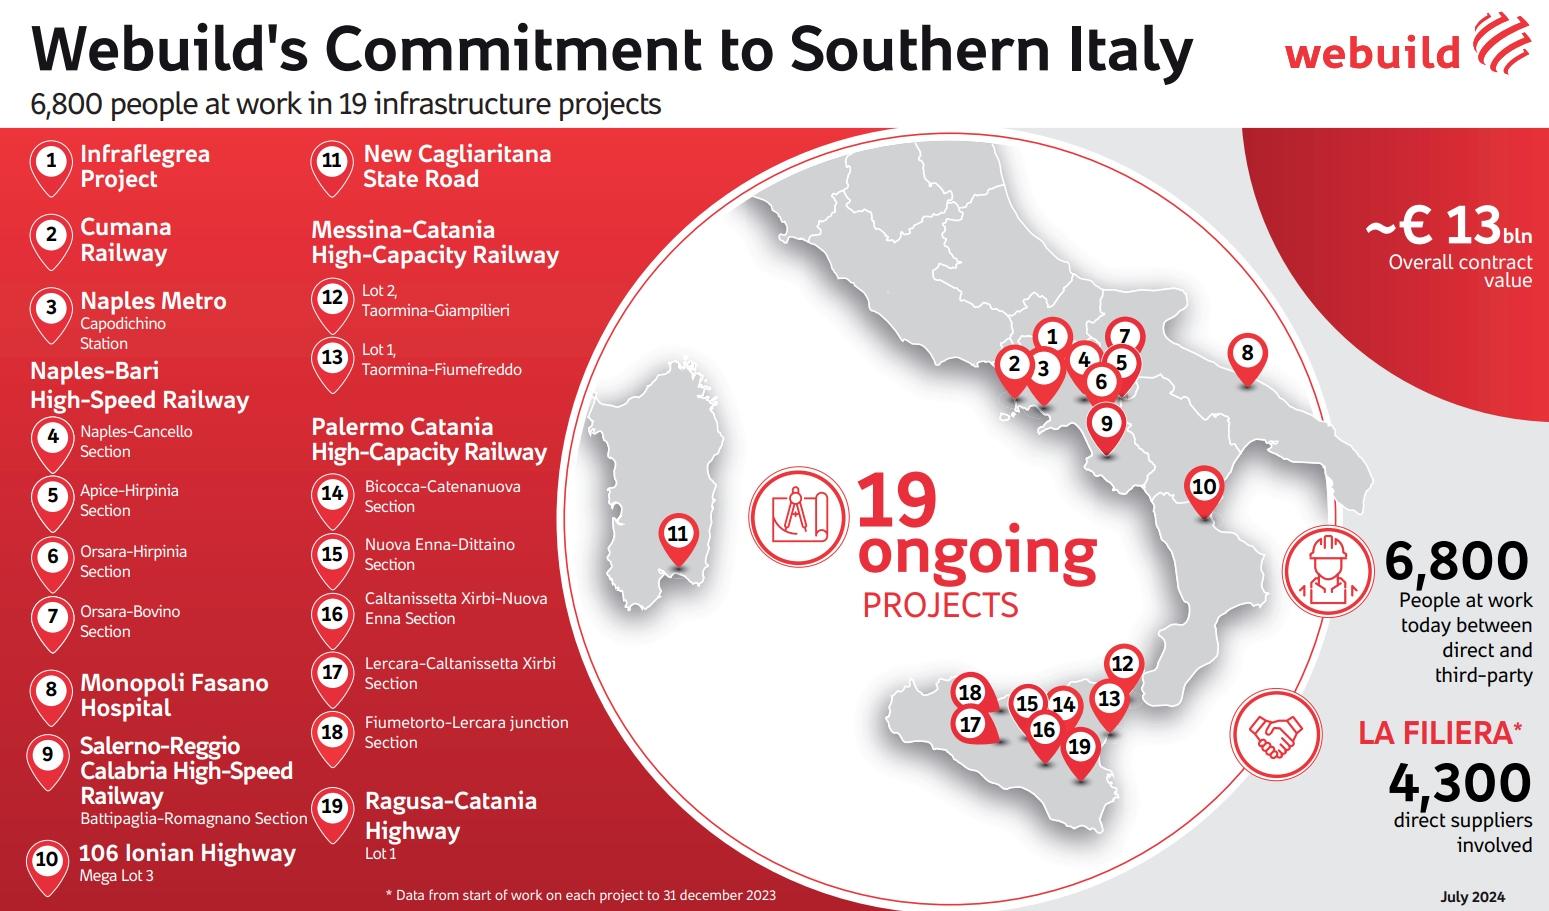 Webuild Committment to Southern Italy